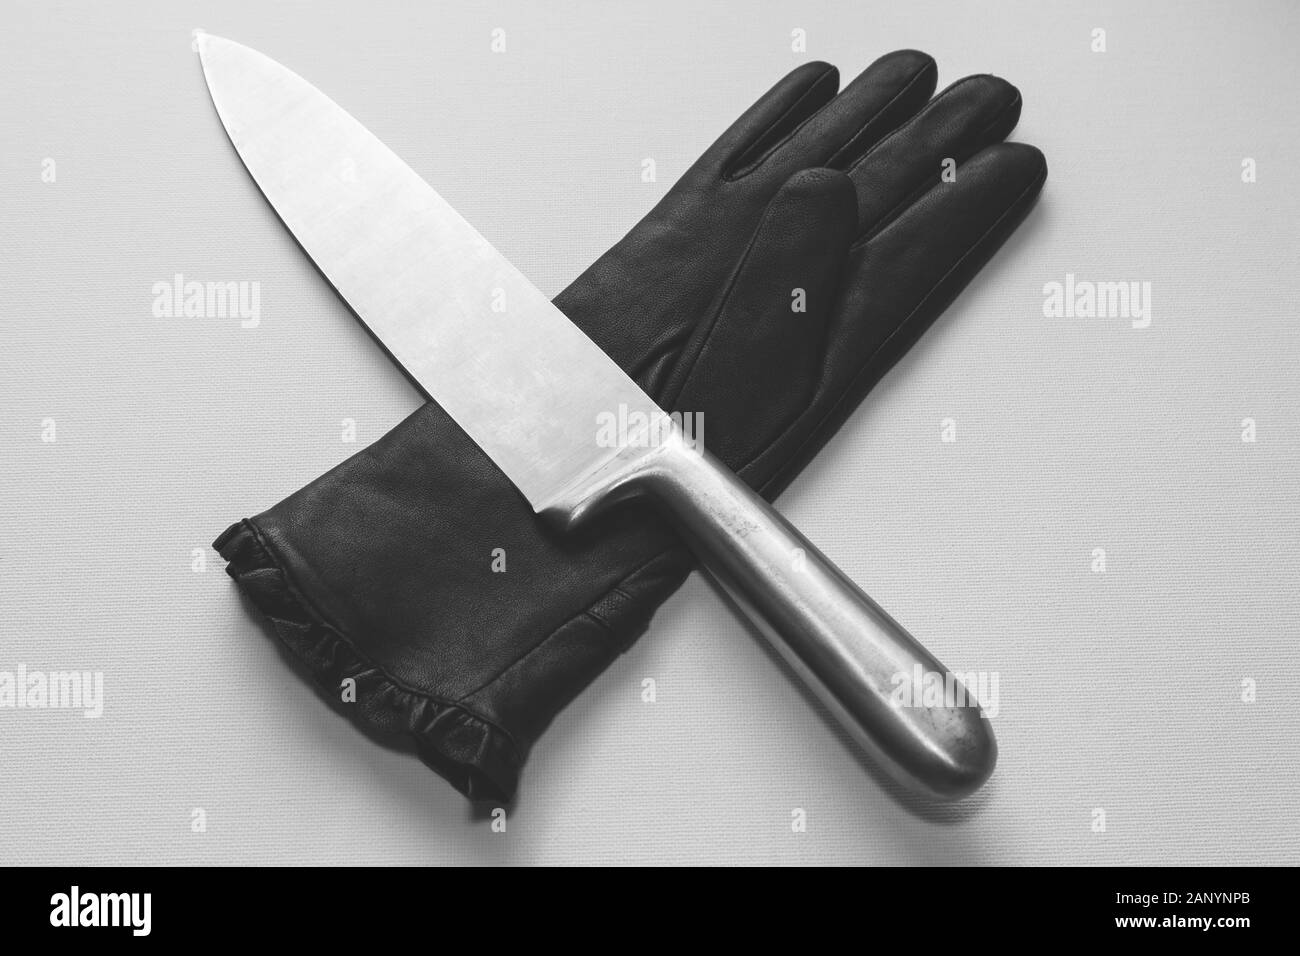 Overhead shot of a metal knife over a black glove on a white surface Stock Photo